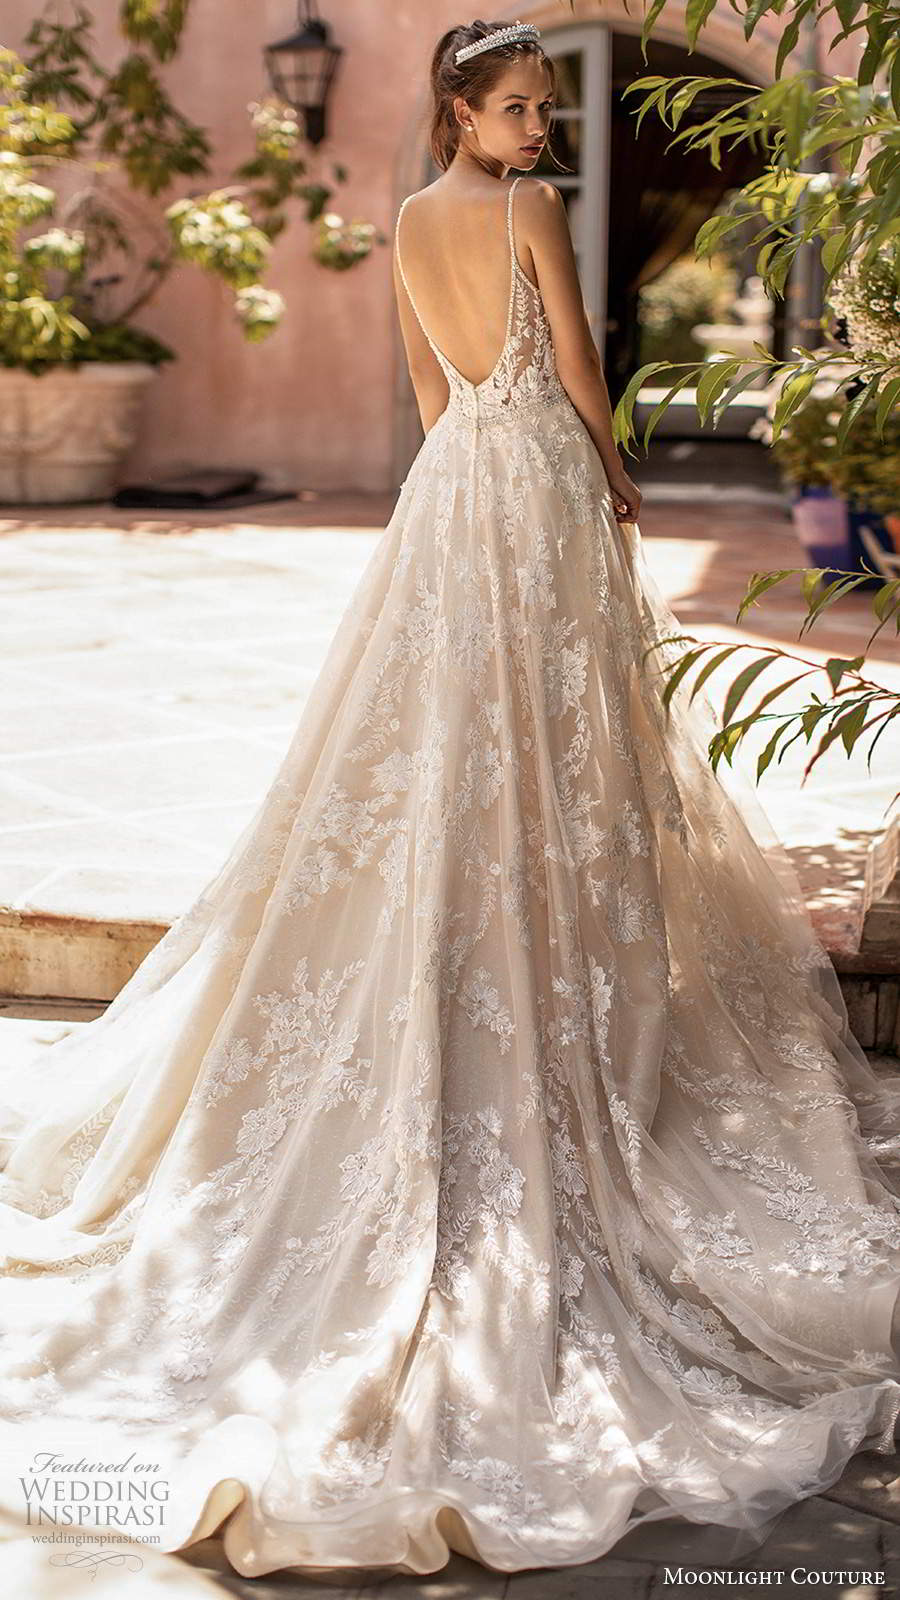 moonlight couture spring 2020 bridal sleeveless beaded thin straps sweetheart neckline fully embellished lace a line ball gown wedding dress low back chapel train (10) bv